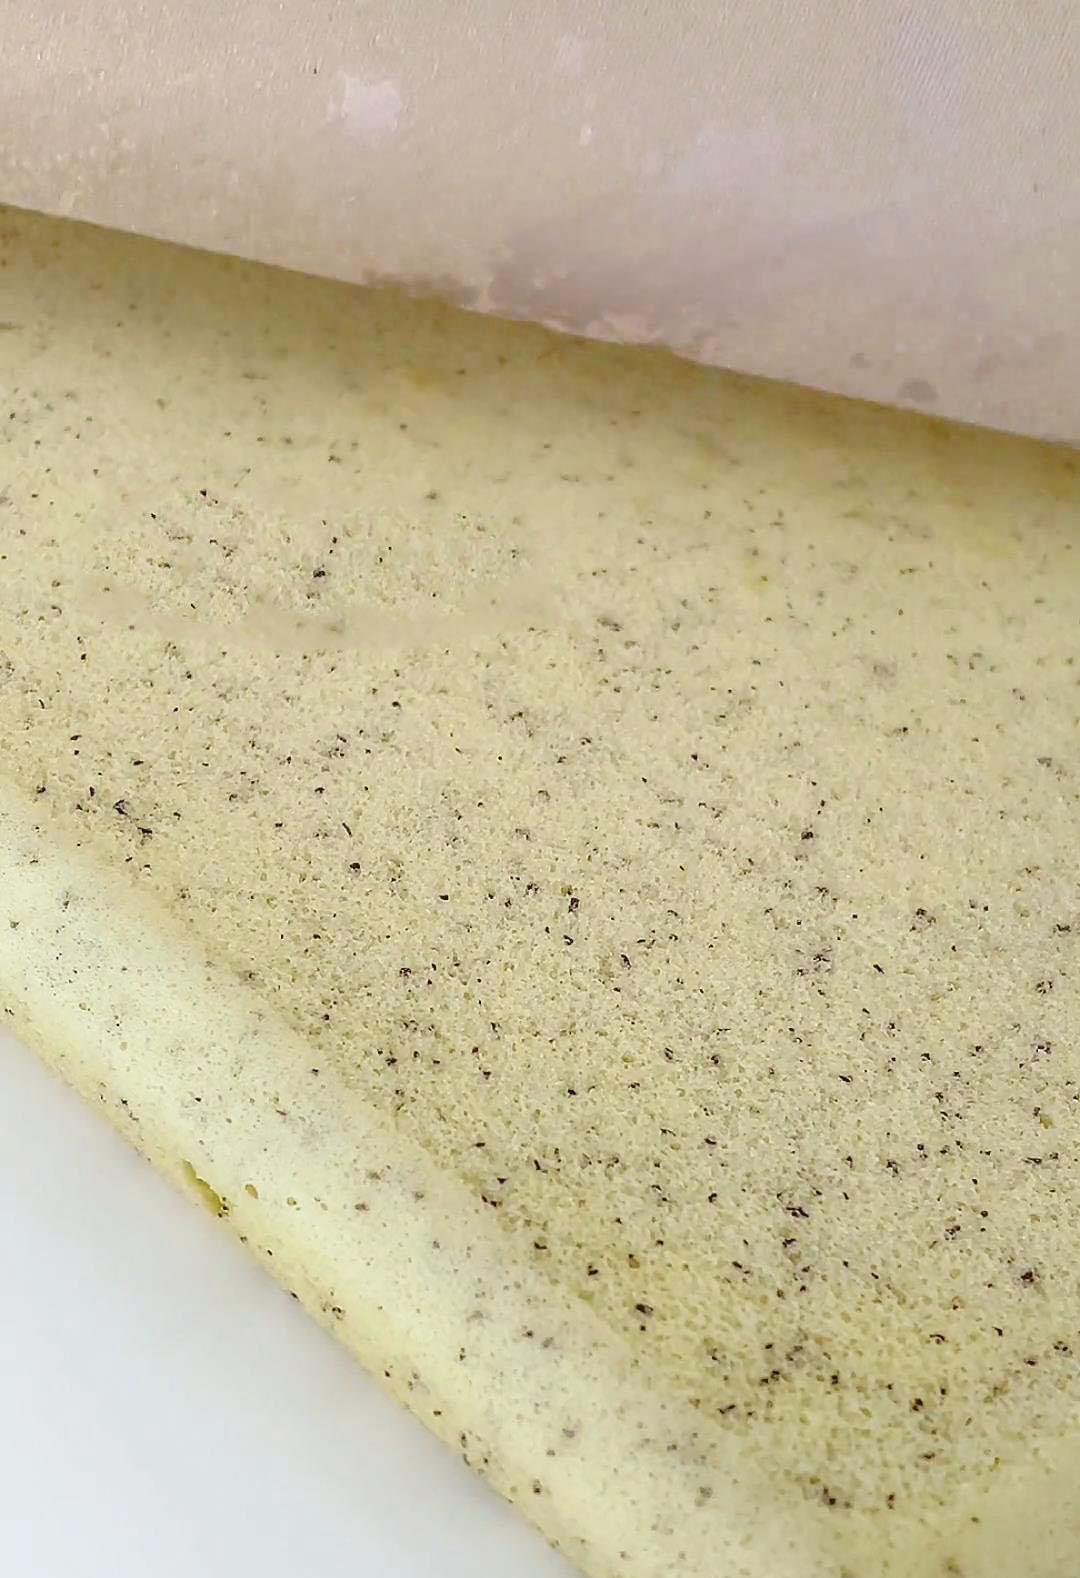 turn it over to a flat surface lined with parchment paper